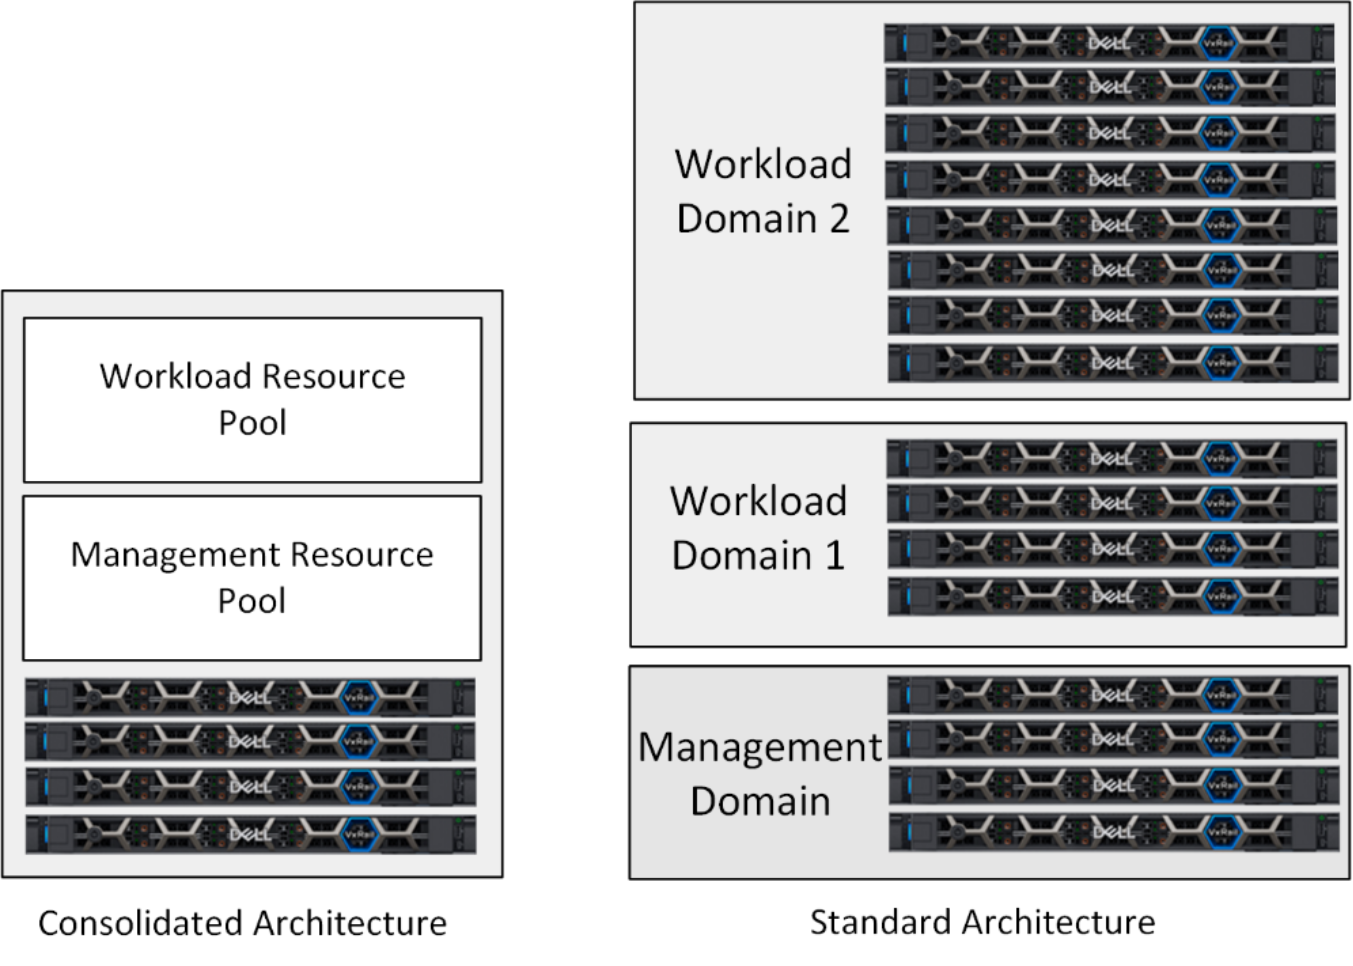 This figure shows consolidated architecture on the left and standard architecture on the right.